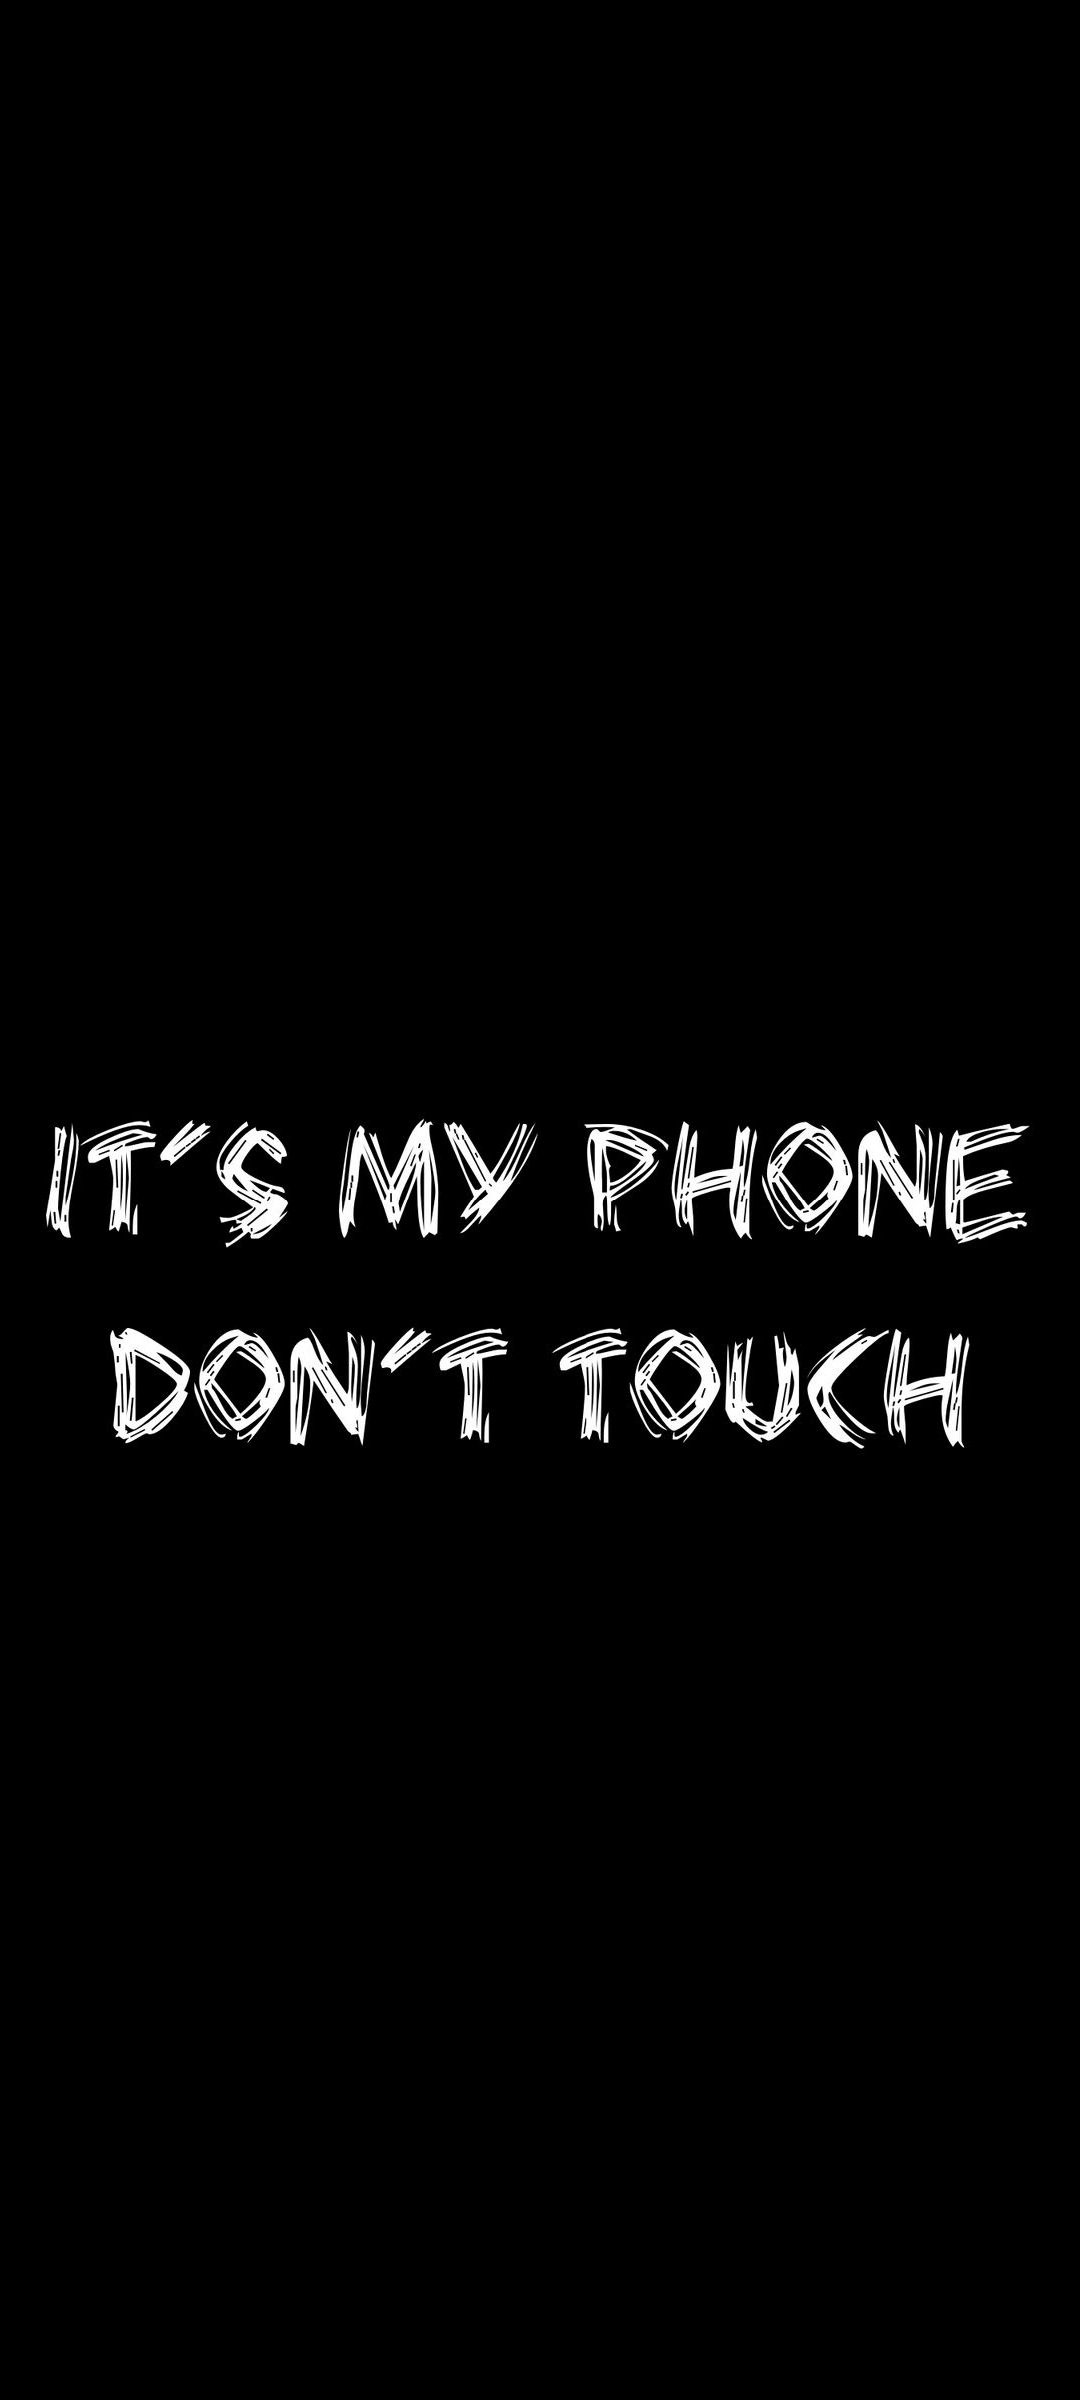 It's my phone don't touch Wallpaper